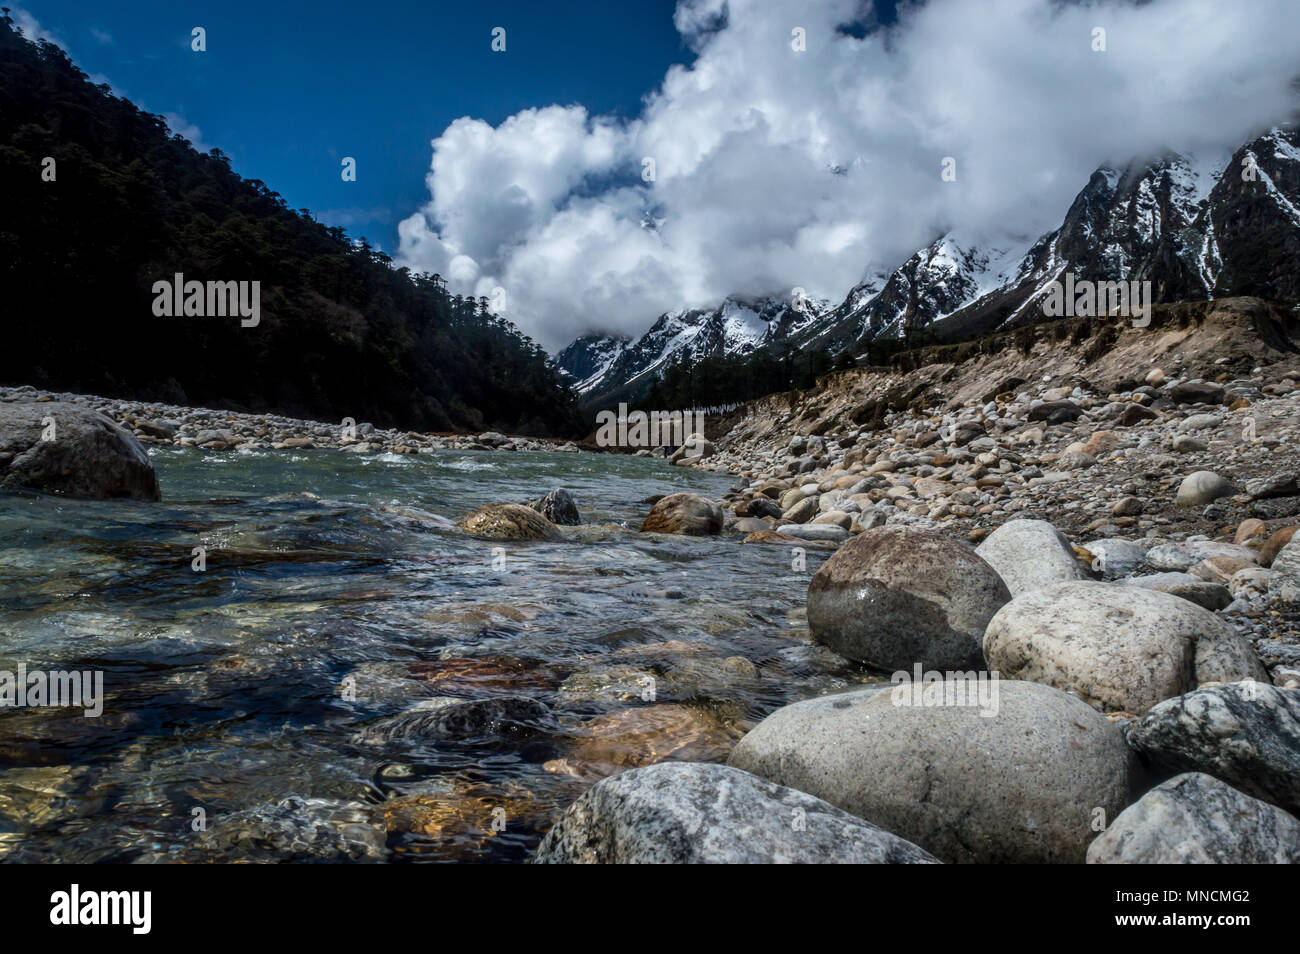 Yumthang valley, a popular tourist attraction and nature camp area on the eastern Himalayas, Sikkim, India Stock Photo